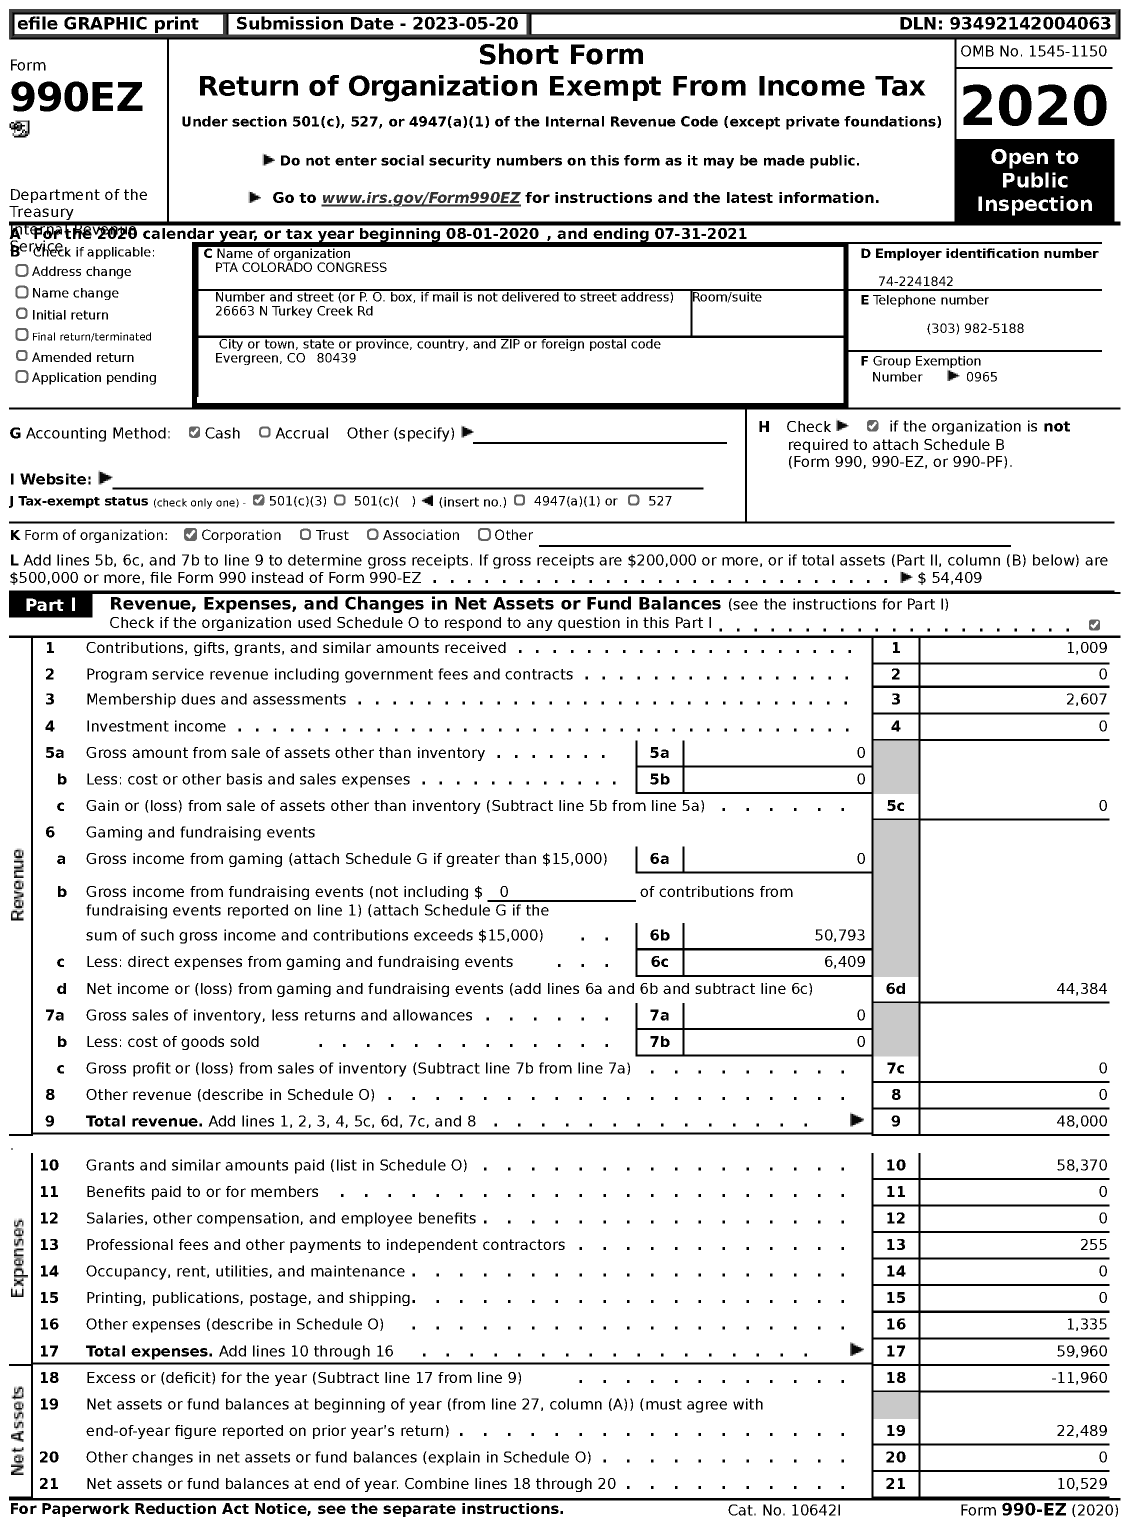 Image of first page of 2020 Form 990EZ for PTA Colorado Congress Marshdale Elementary